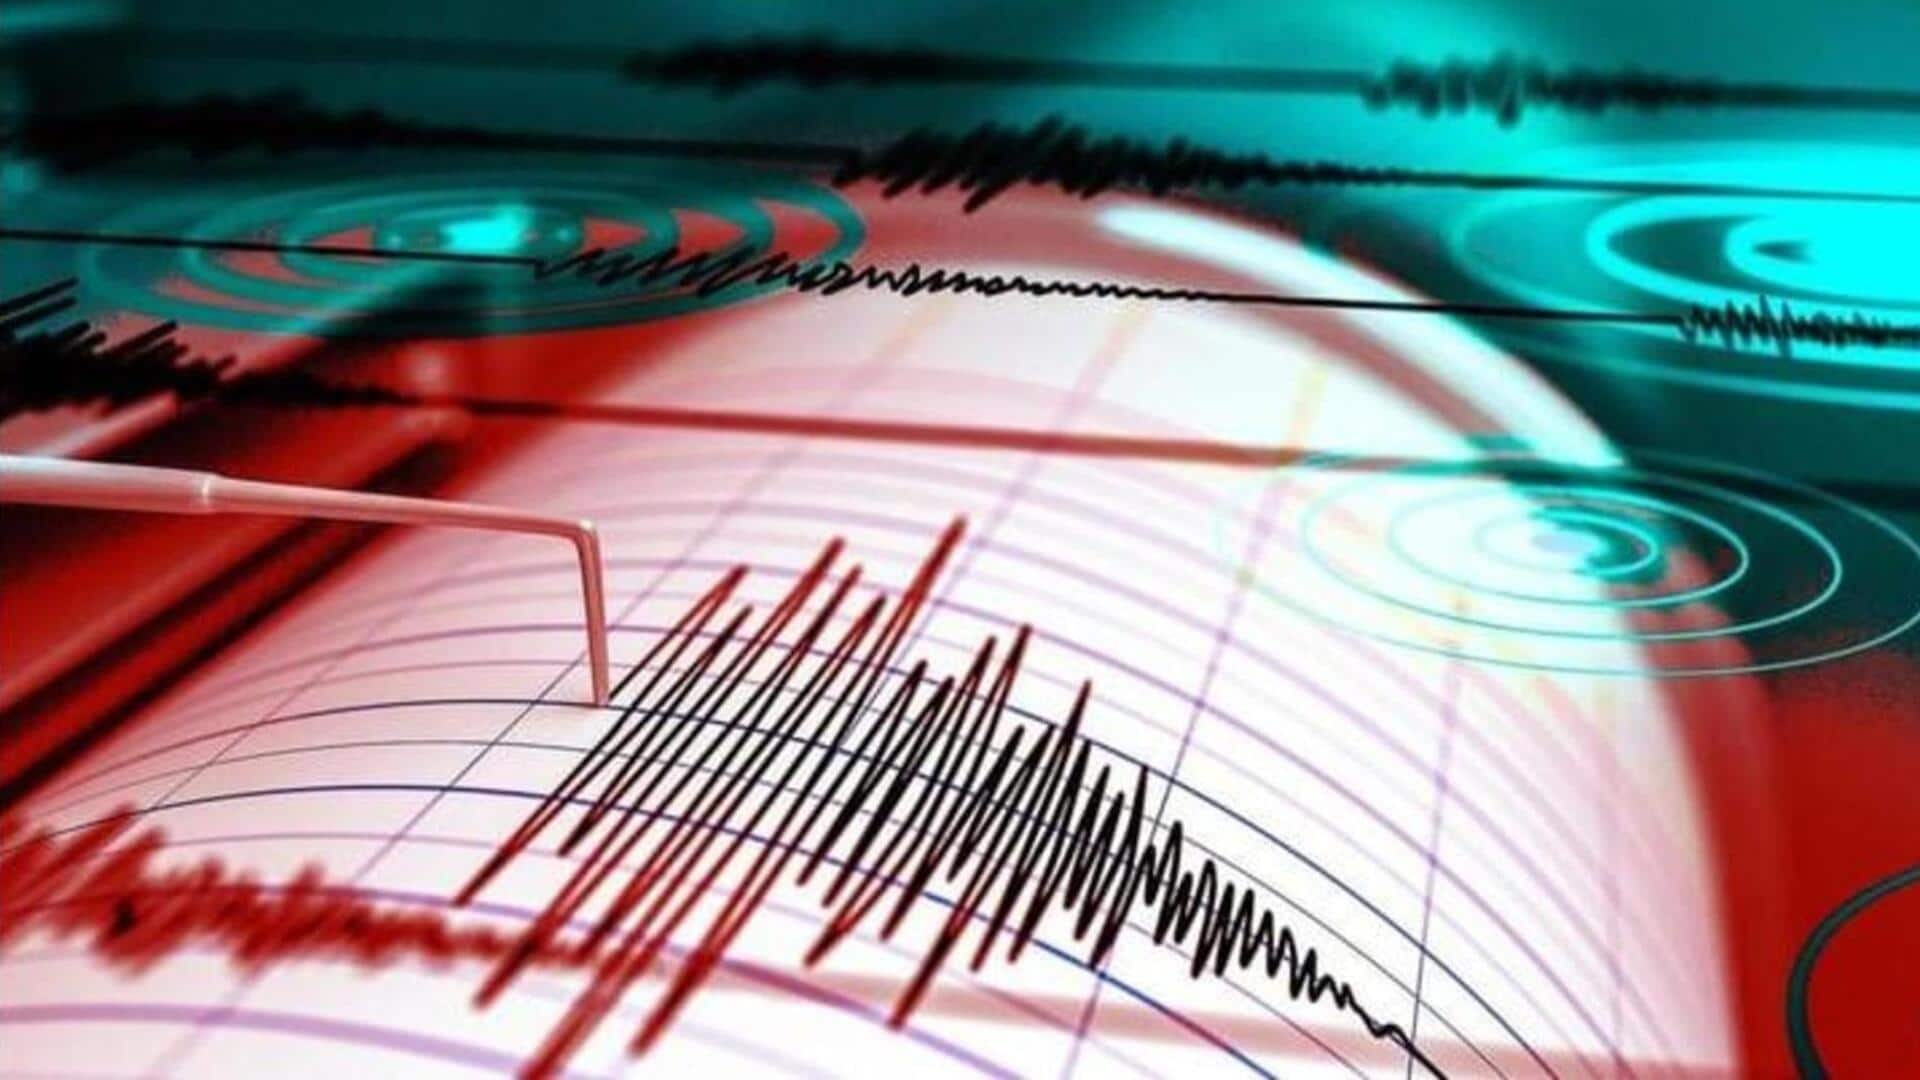 Earthquake jolts Delhi-NCR, J&K, parts of Pakistan, Afghanistan, China: Reports 